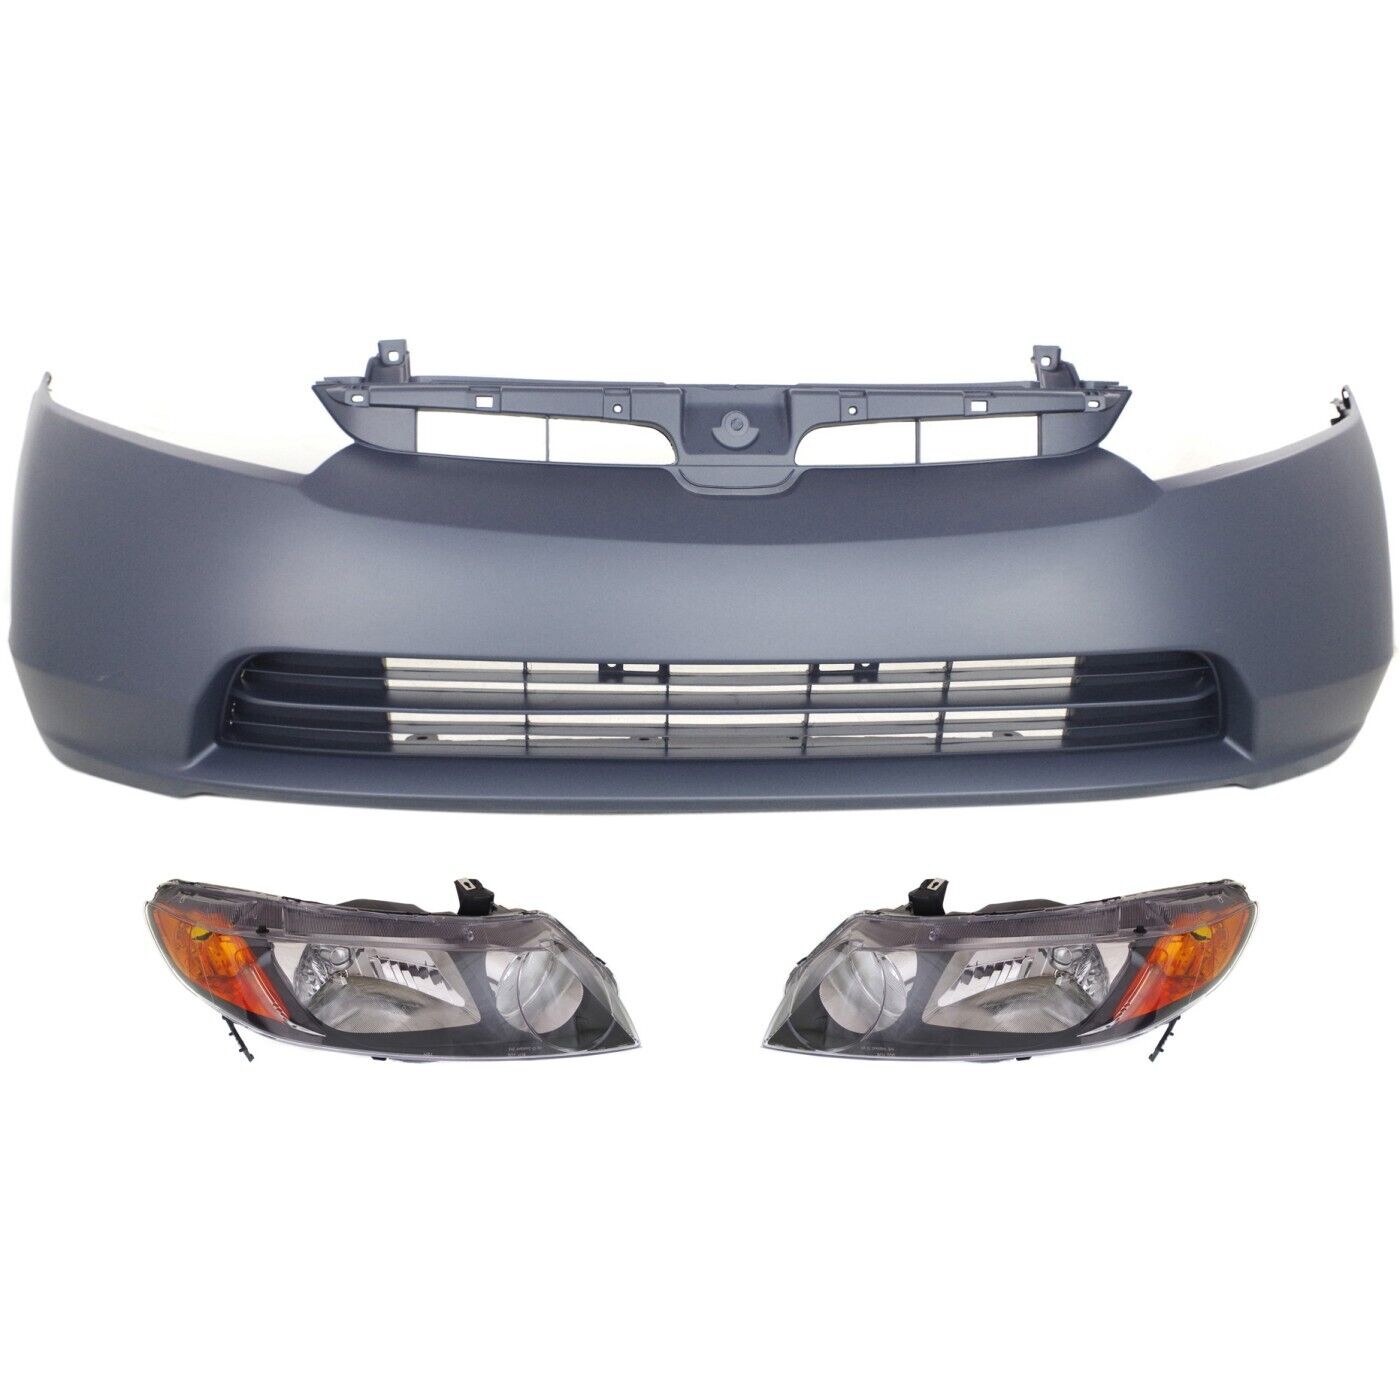 Front Bumper Kit Includes Left and Right Headlights For 2006-2008 Honda Civic